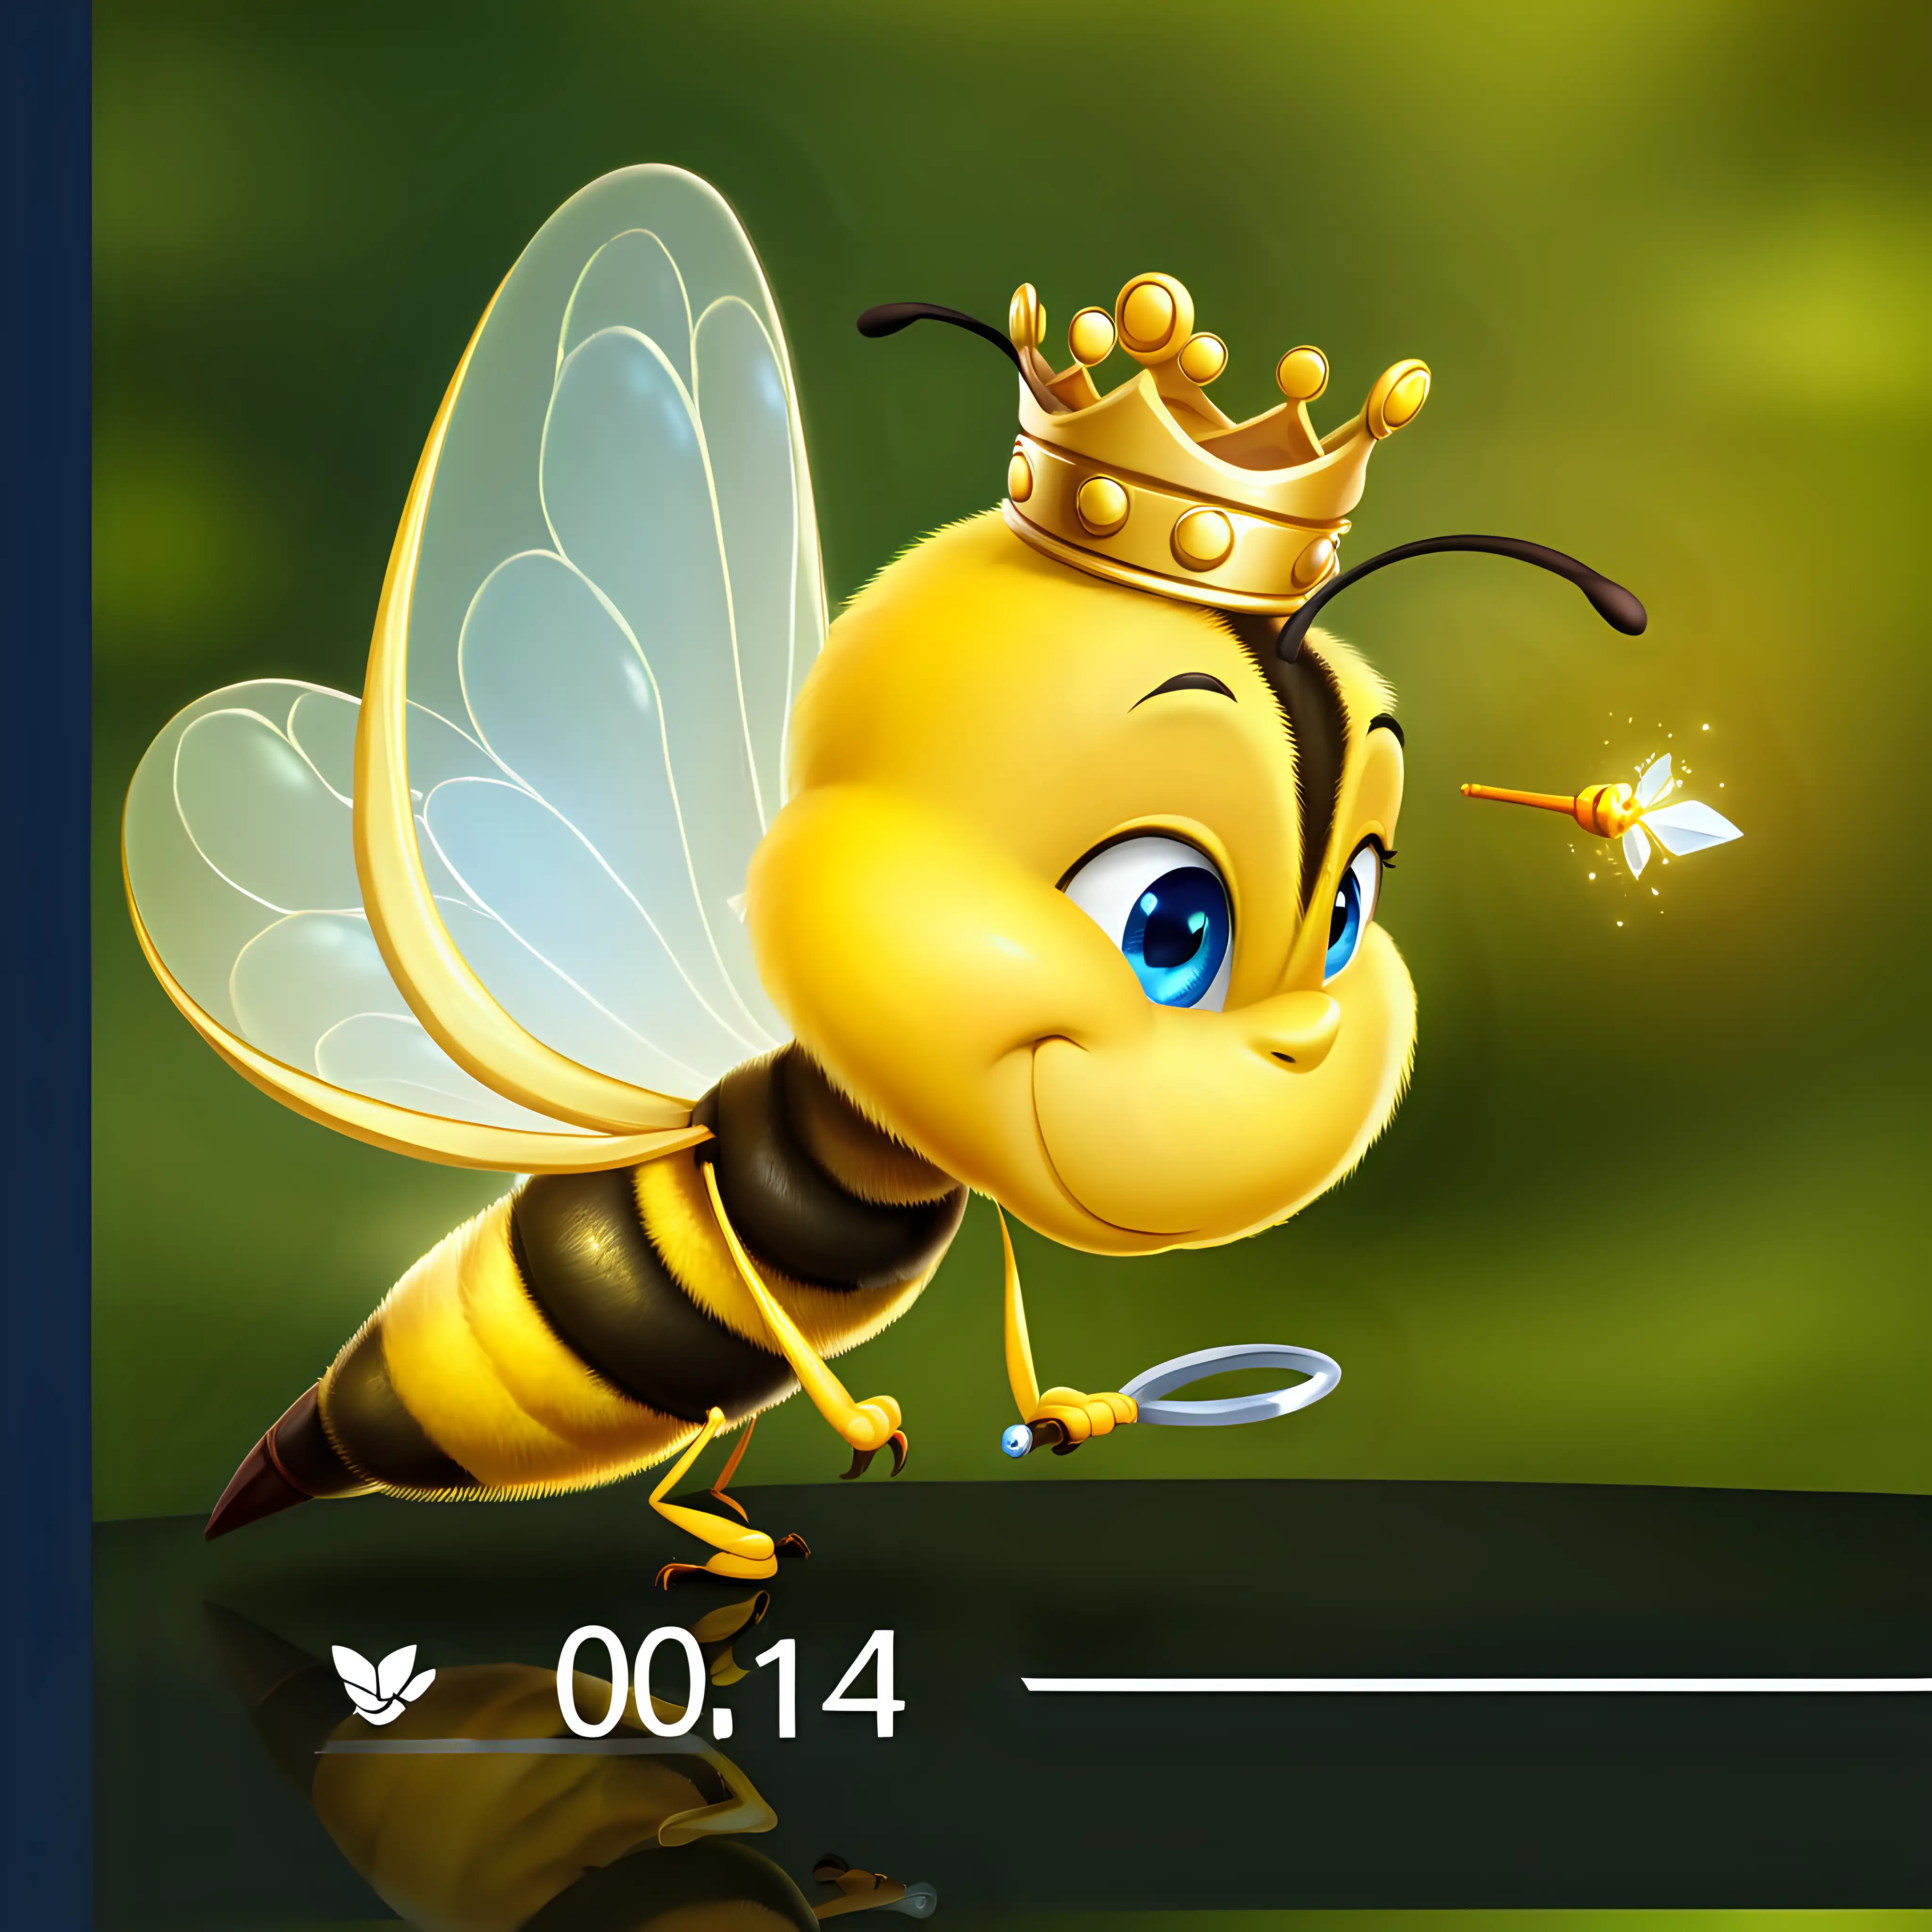 Smiling Bee with Blue Eyes Wearing Crown and Scepter